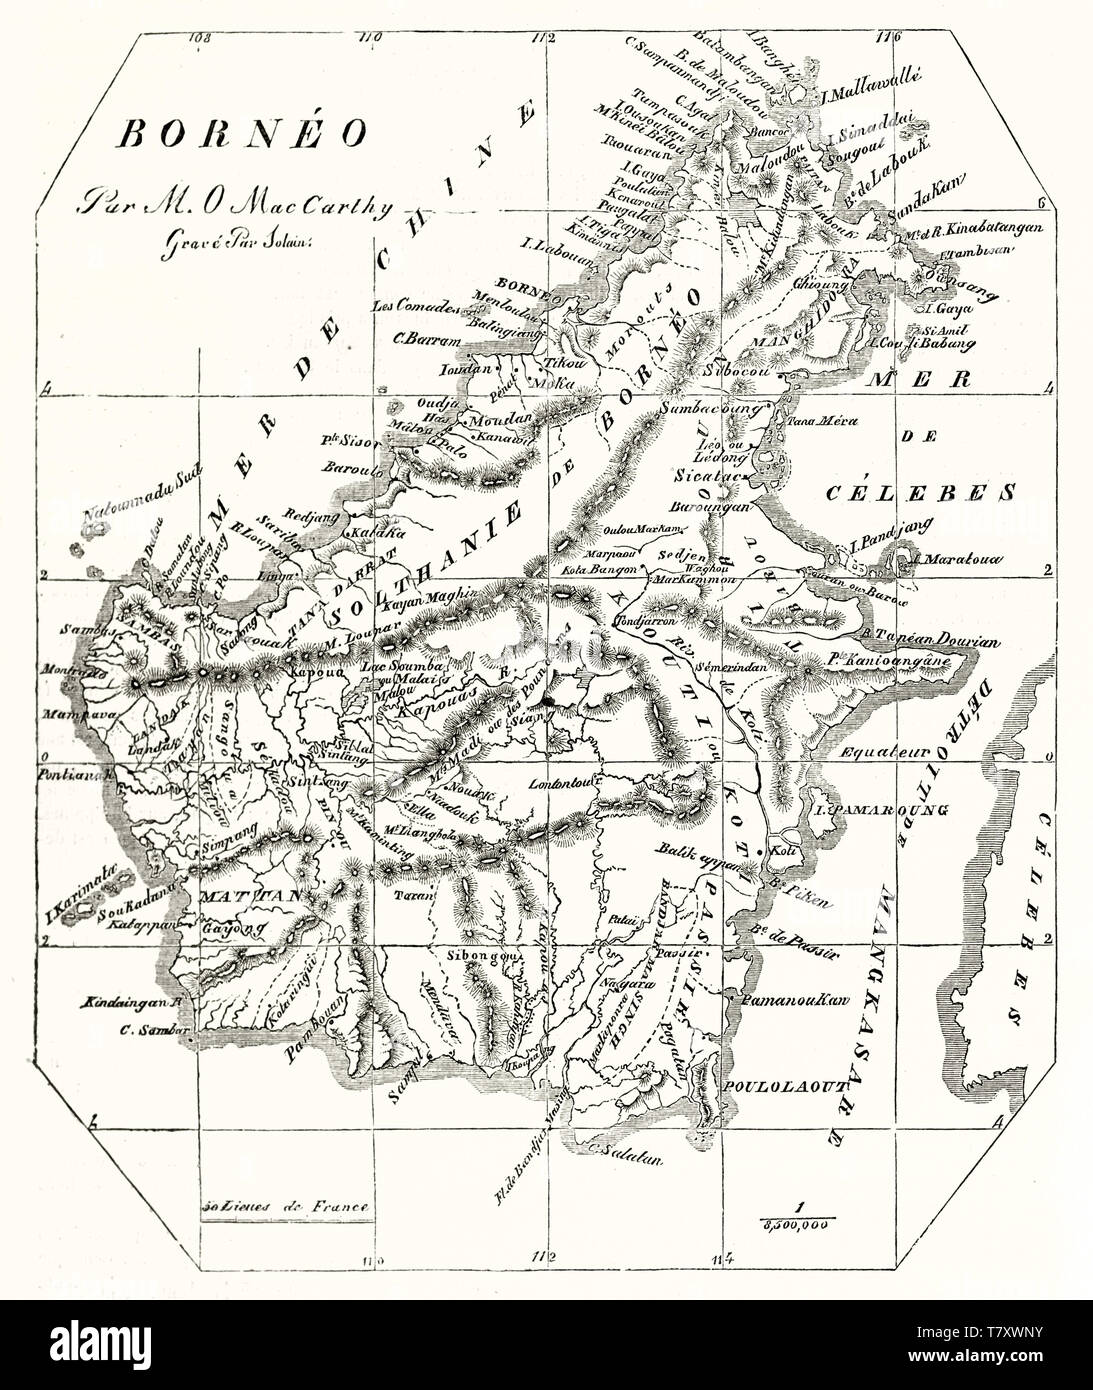 Old map of Borneo island on an ancient slightly yellowed paper. By unidentified author publ. on Magasin Pittoresque Paris 1848 Stock Photo